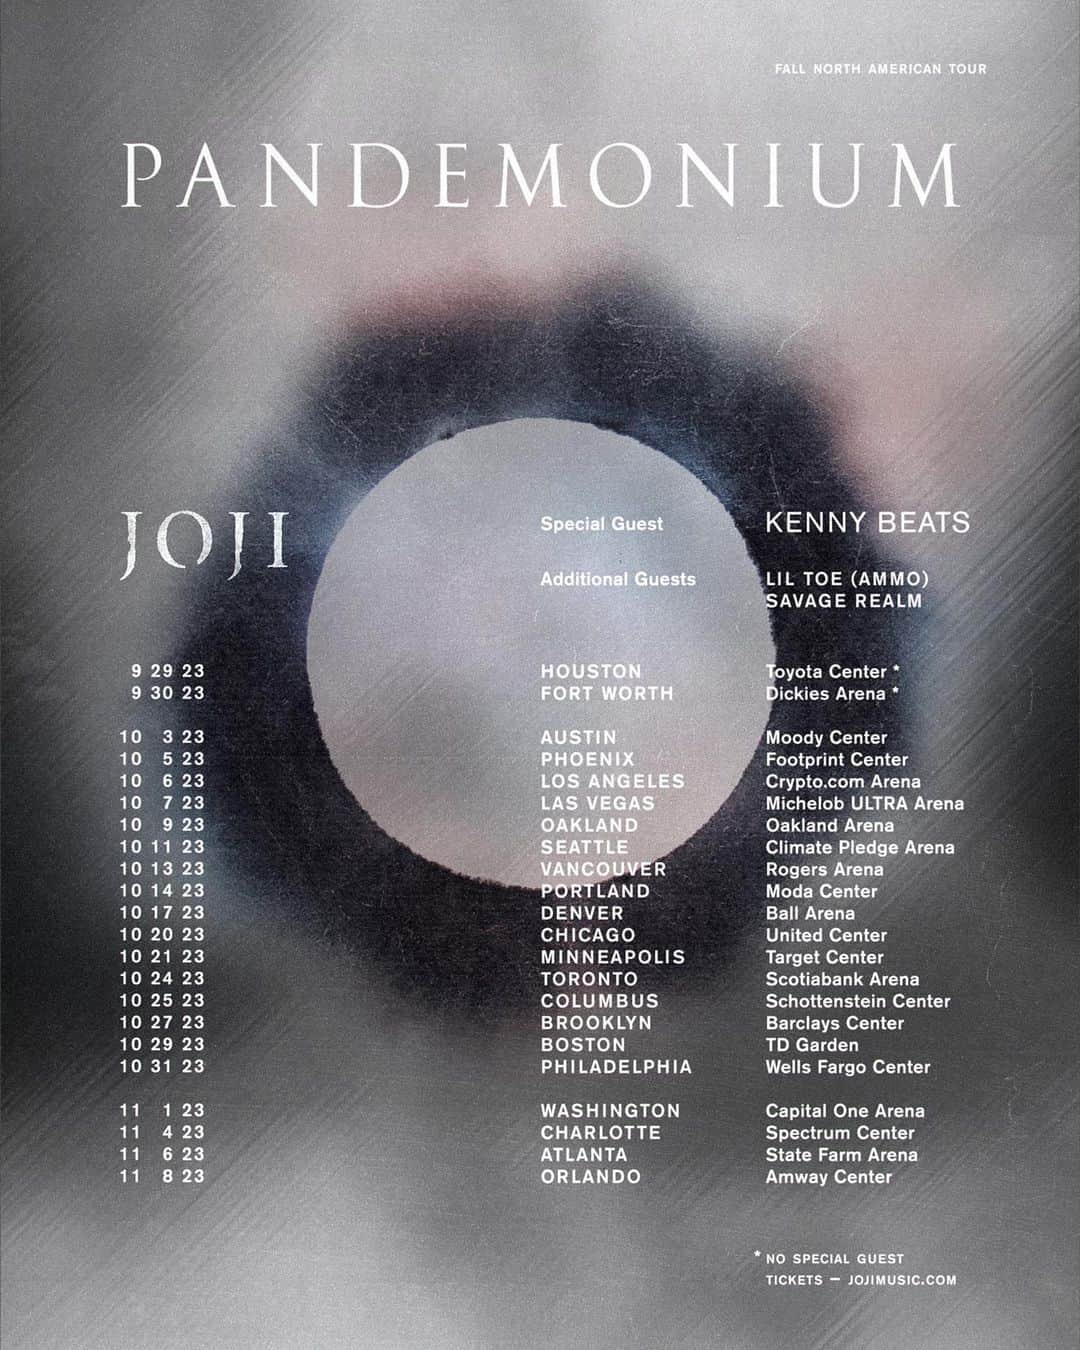 Jojiのインスタグラム：「PANDEMONIUM NORTH AMERICAN TOUR  PRE-SALES START THIS WEDS JUNE 7th 2023 @ 10 AM LOCAL TIME  REGISTER FOR PRE-SALE ACCESS AT JOJIMUSIC.COM」